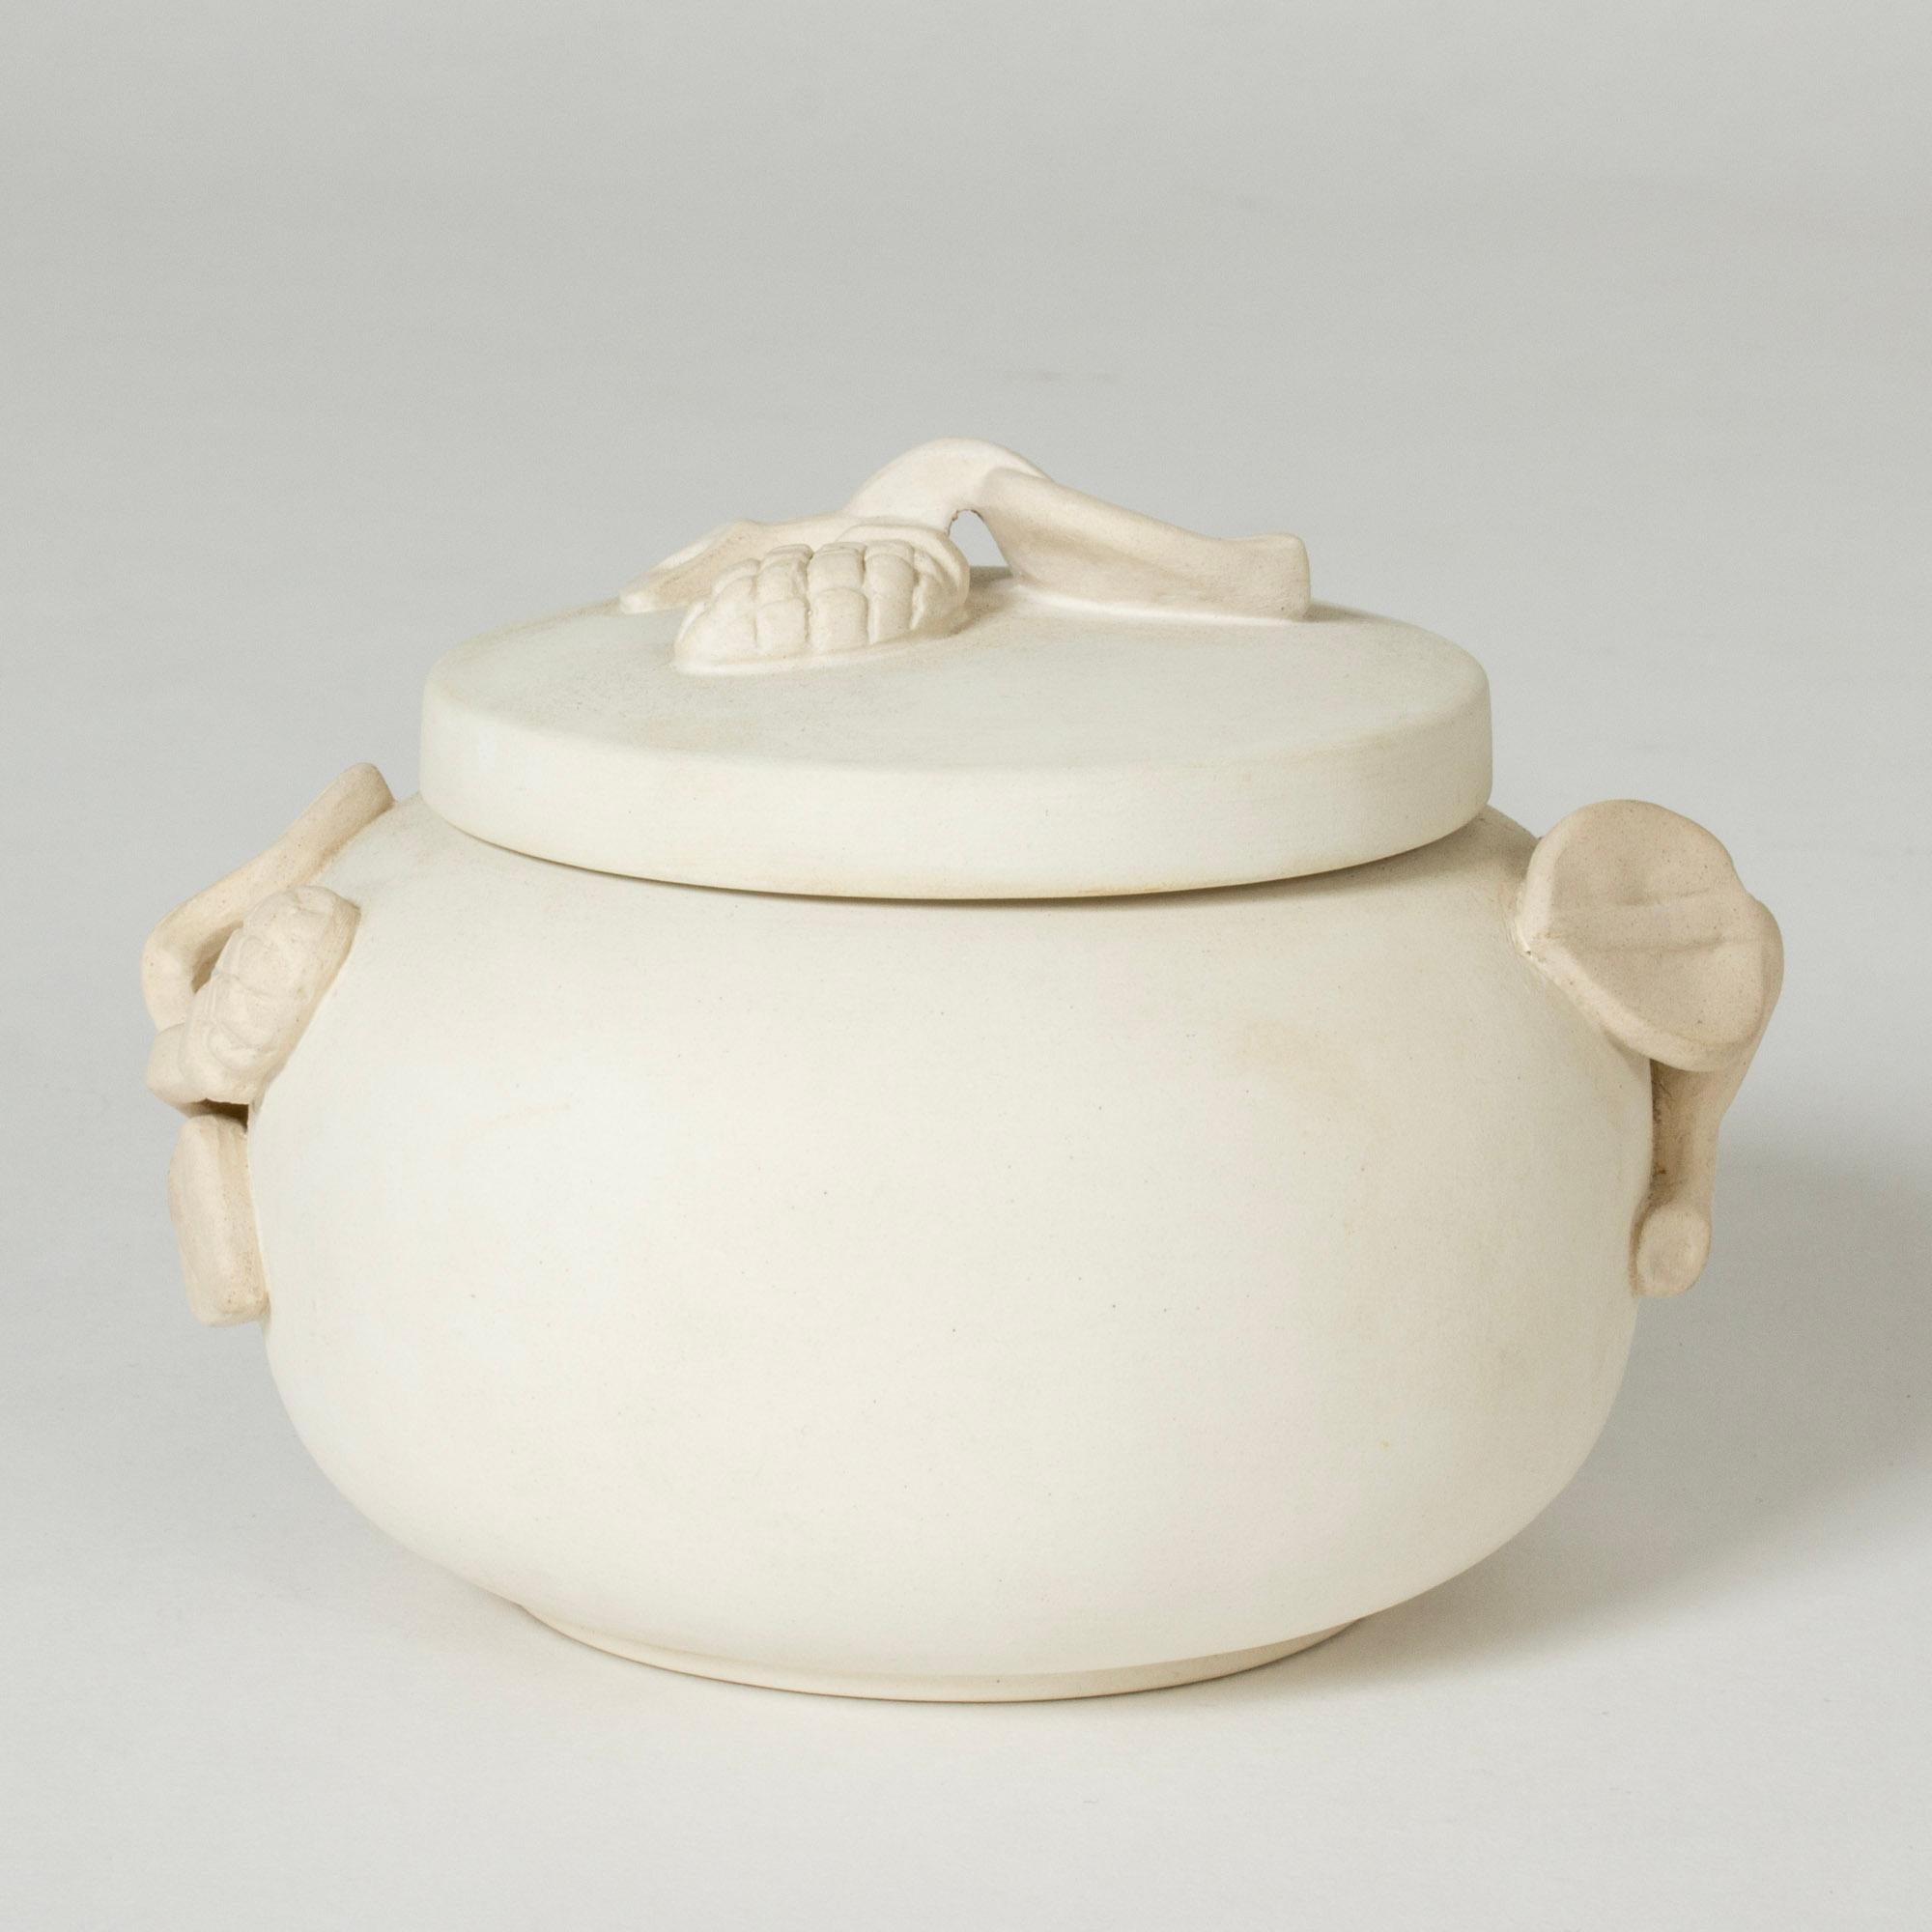 Beautiful “Relief” jar by Wilhelm Kåge, made in white, unglazed “Carrara” stoneware. Clean form with ornaments of twigs on the sides and lid.